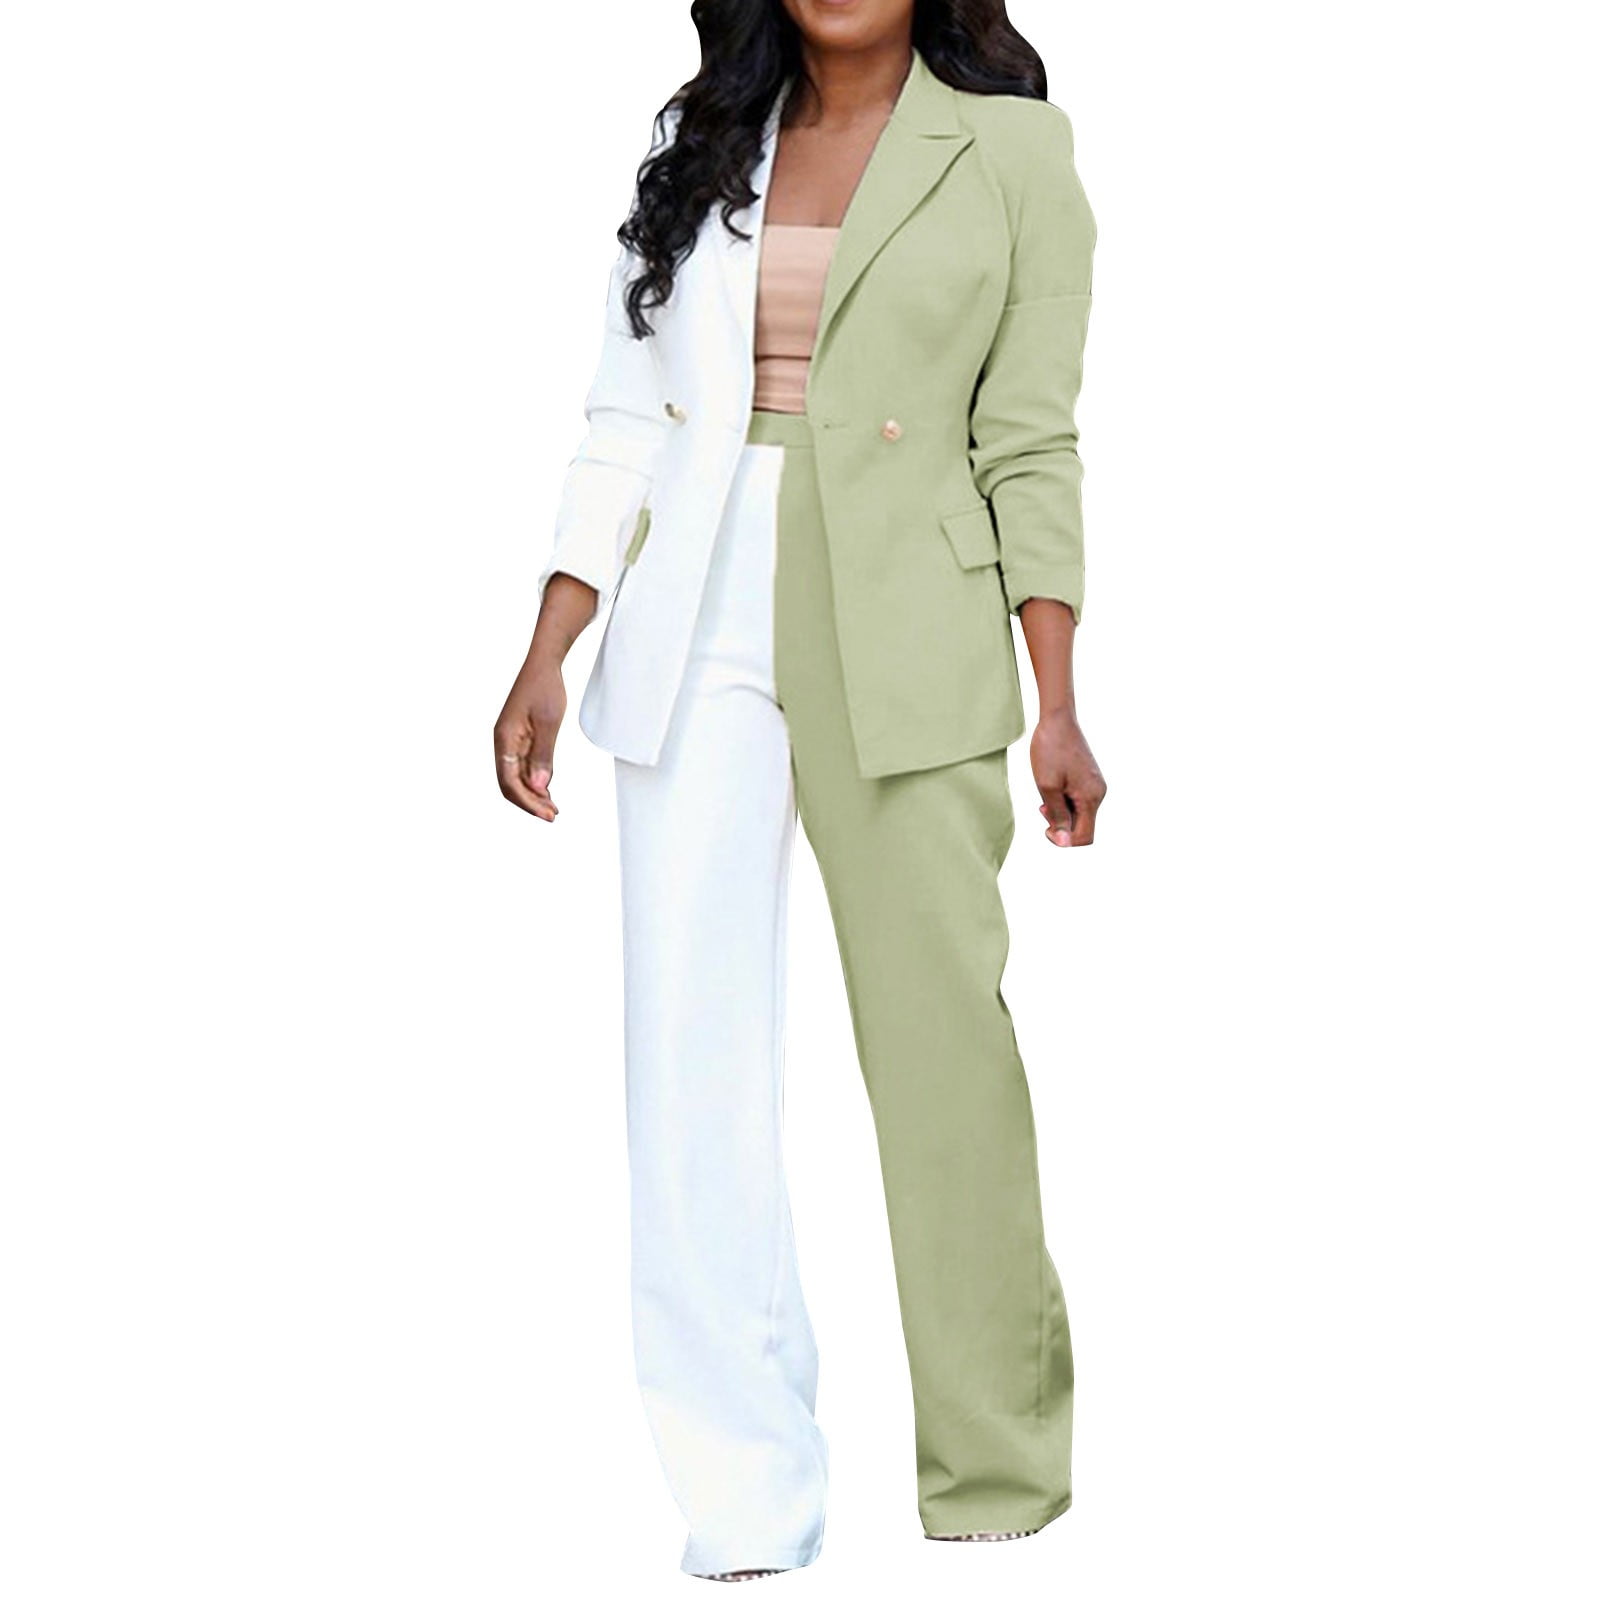 Plus Size Tailored Lady Slim Pants Suits Spring Fashion Women Prom